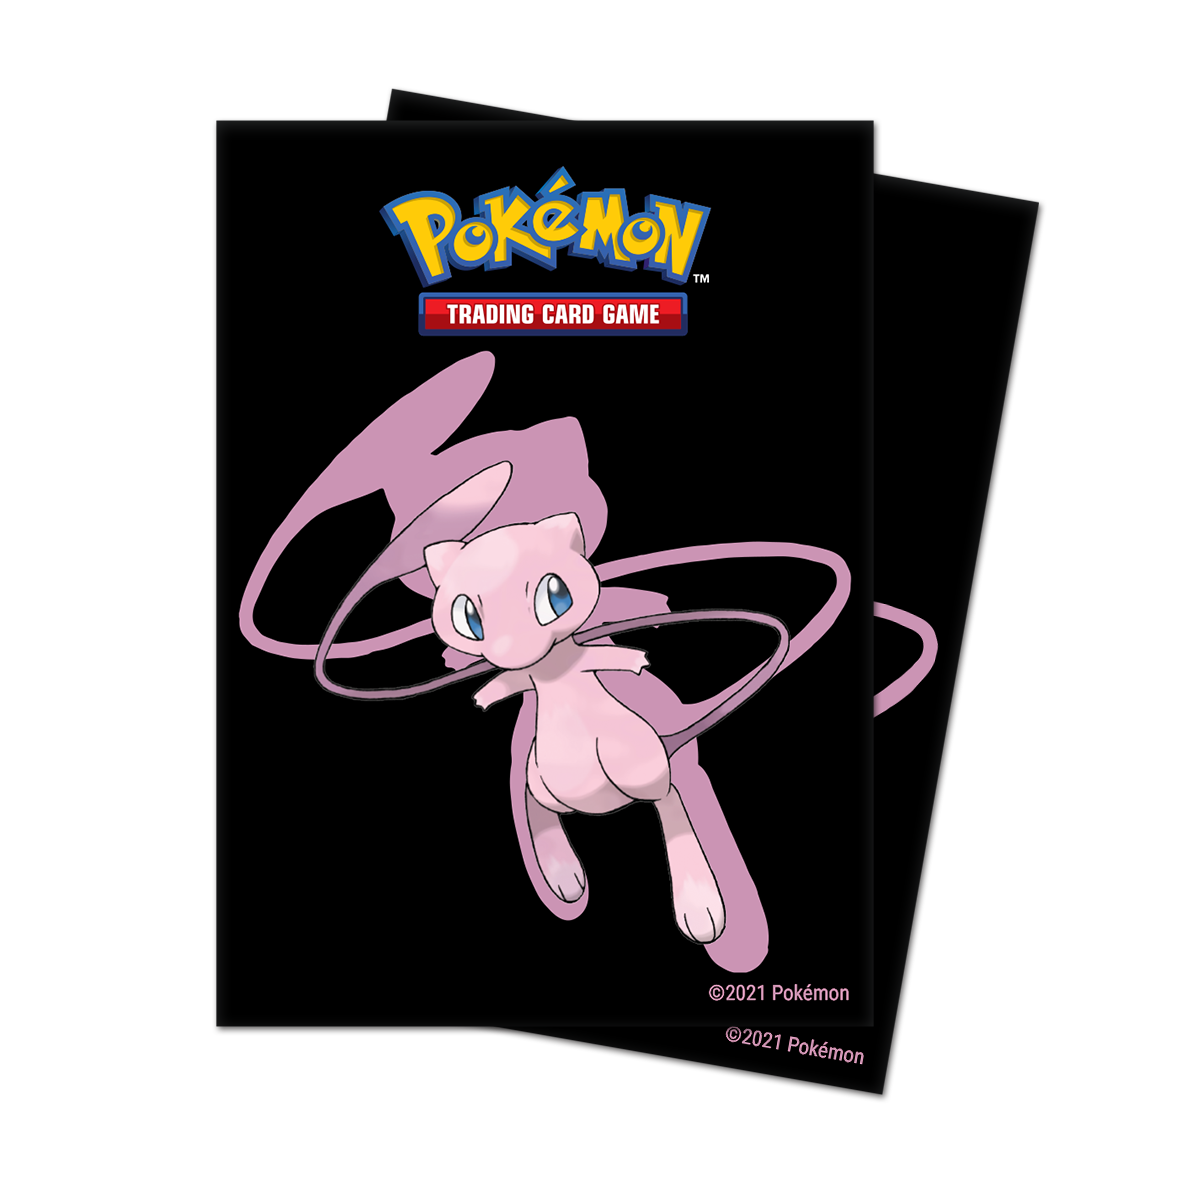 Pokemon Mew png images